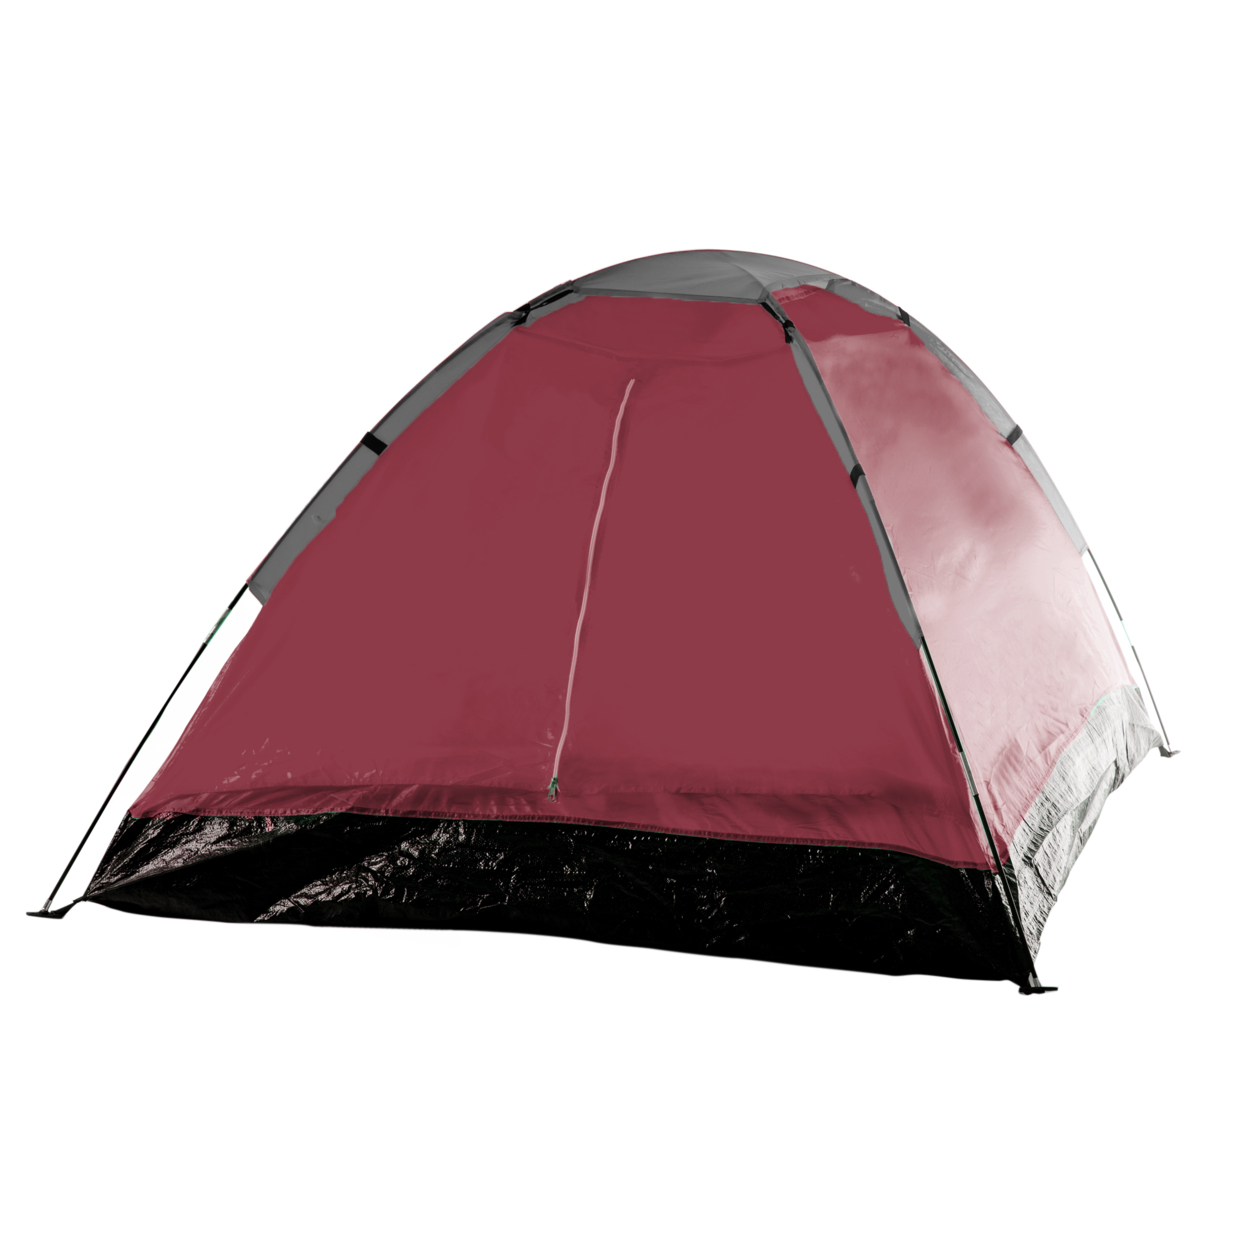 Happy Camper Two Person Tent By Wakeman Outdoors - Brick Red